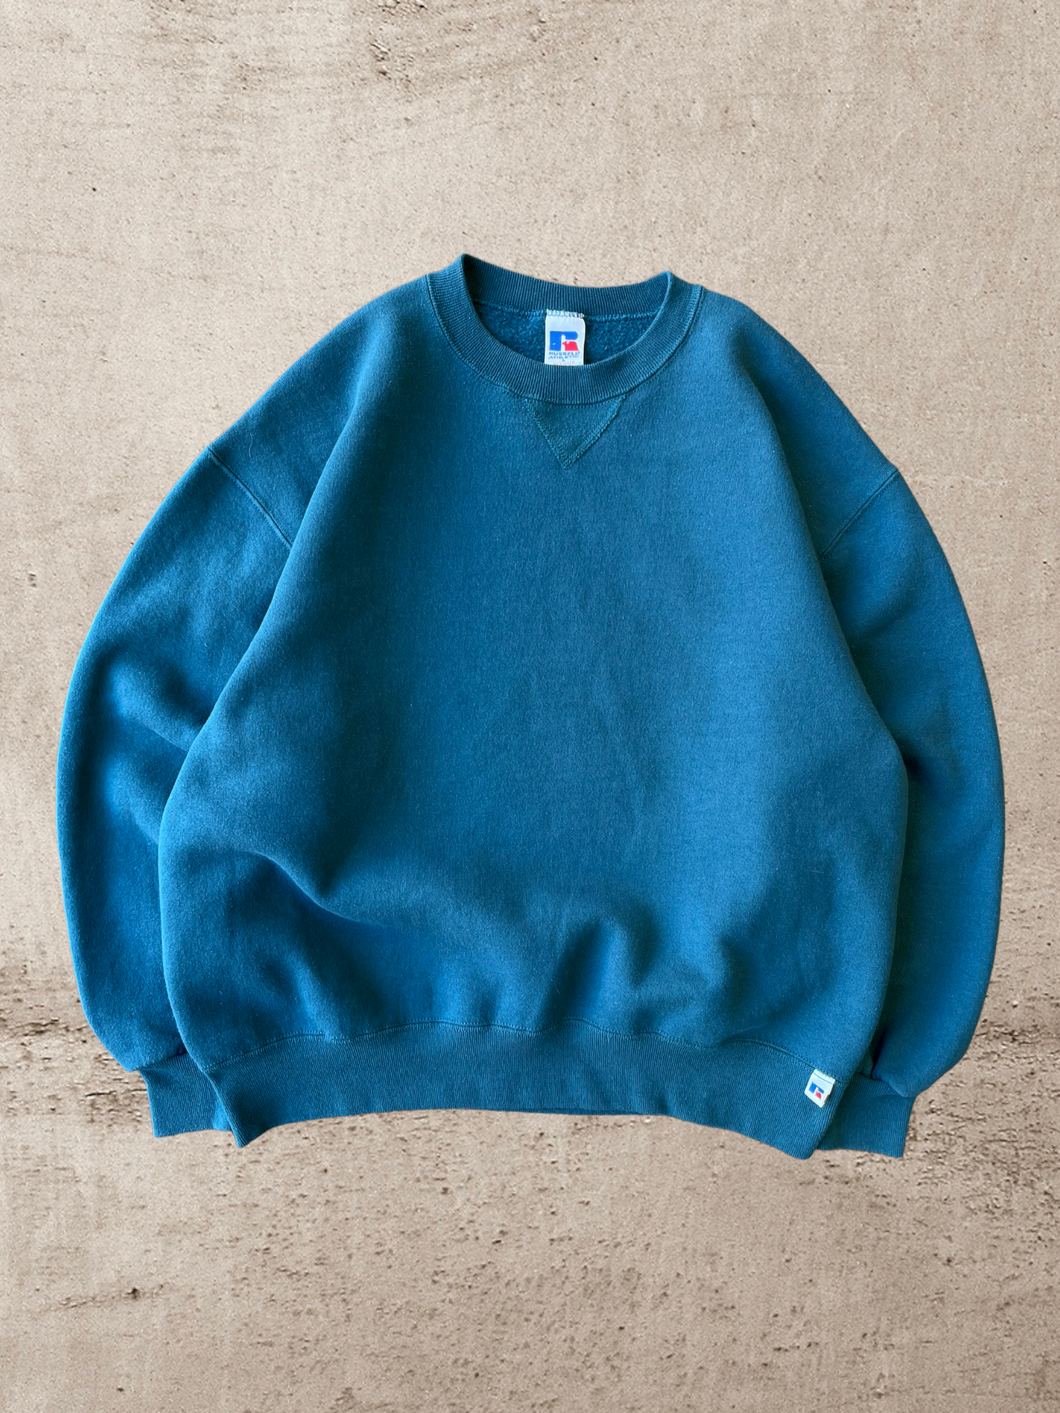 90s Blue Russell Blank Crewneck - Large